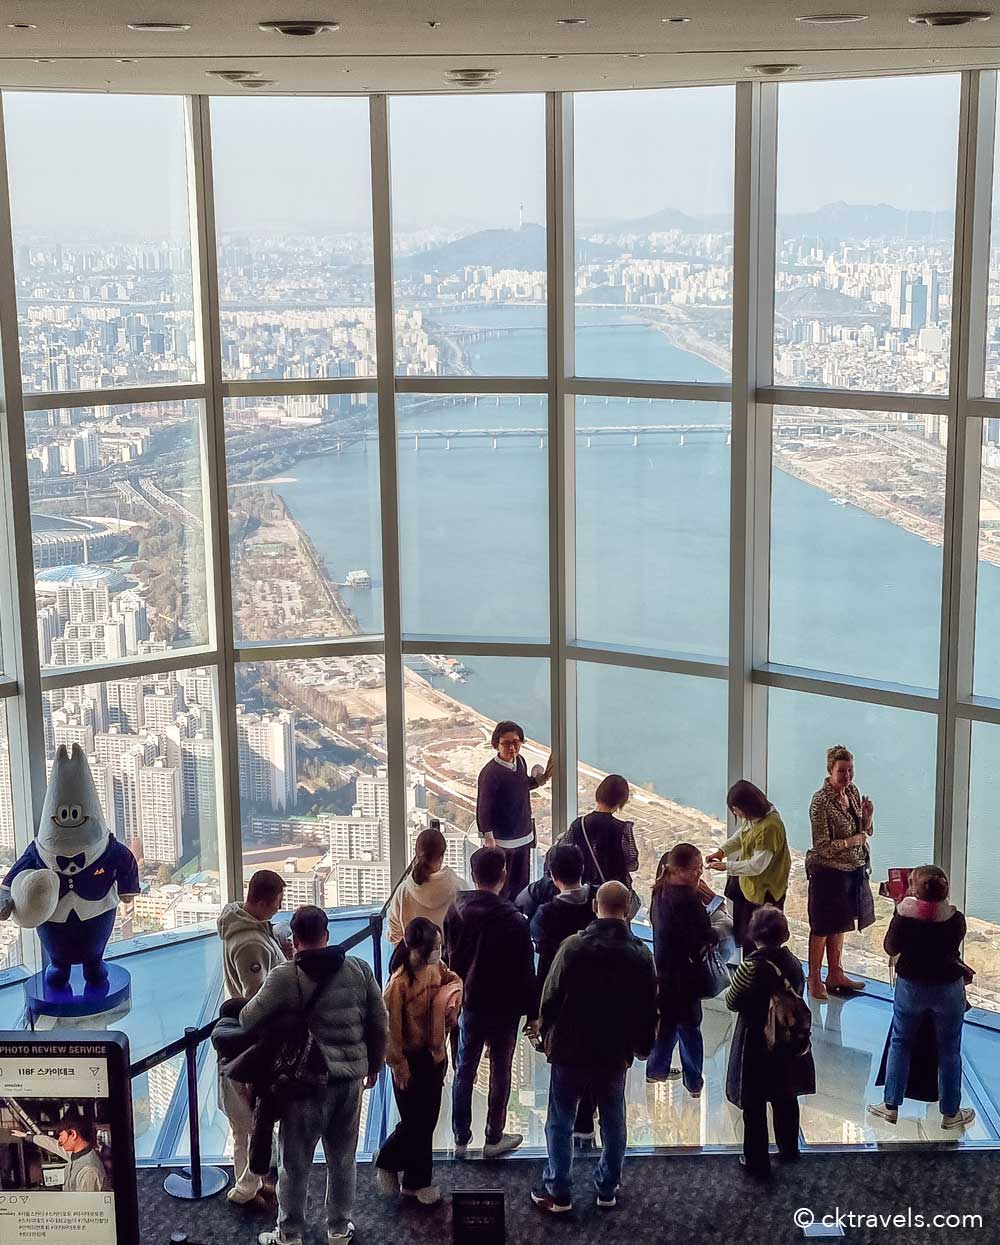 Seoul Sky Observatory at Lotte World Tower